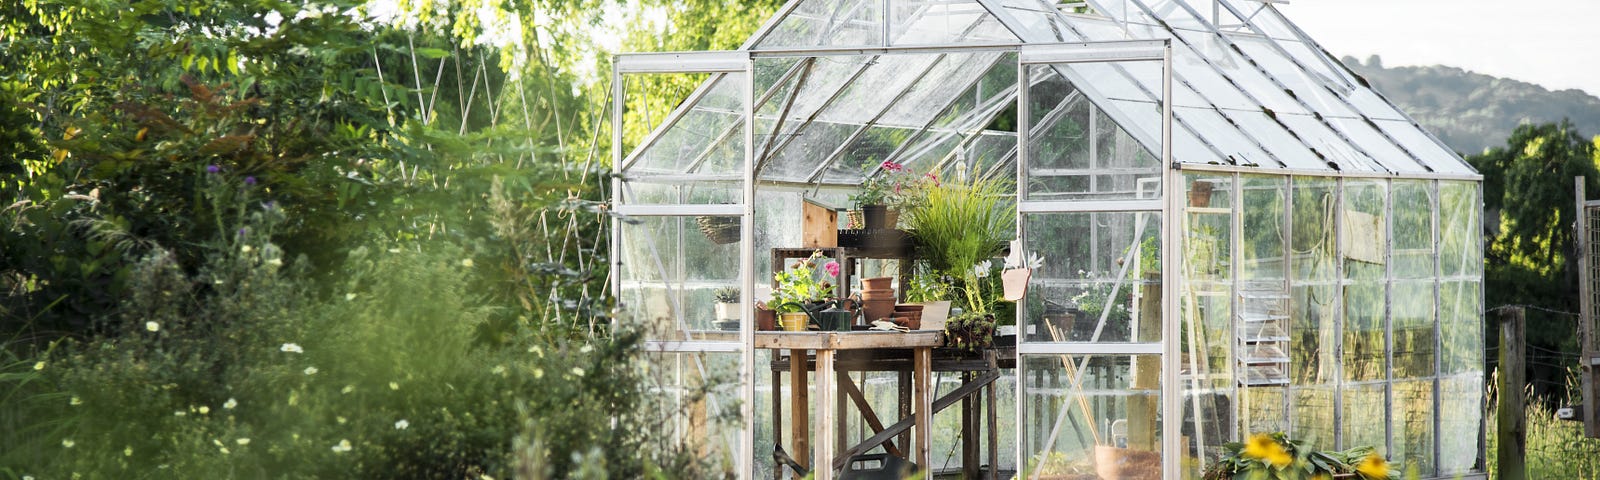 A small greenhouse sitting in a sunny forest with the door open and several plants inside.